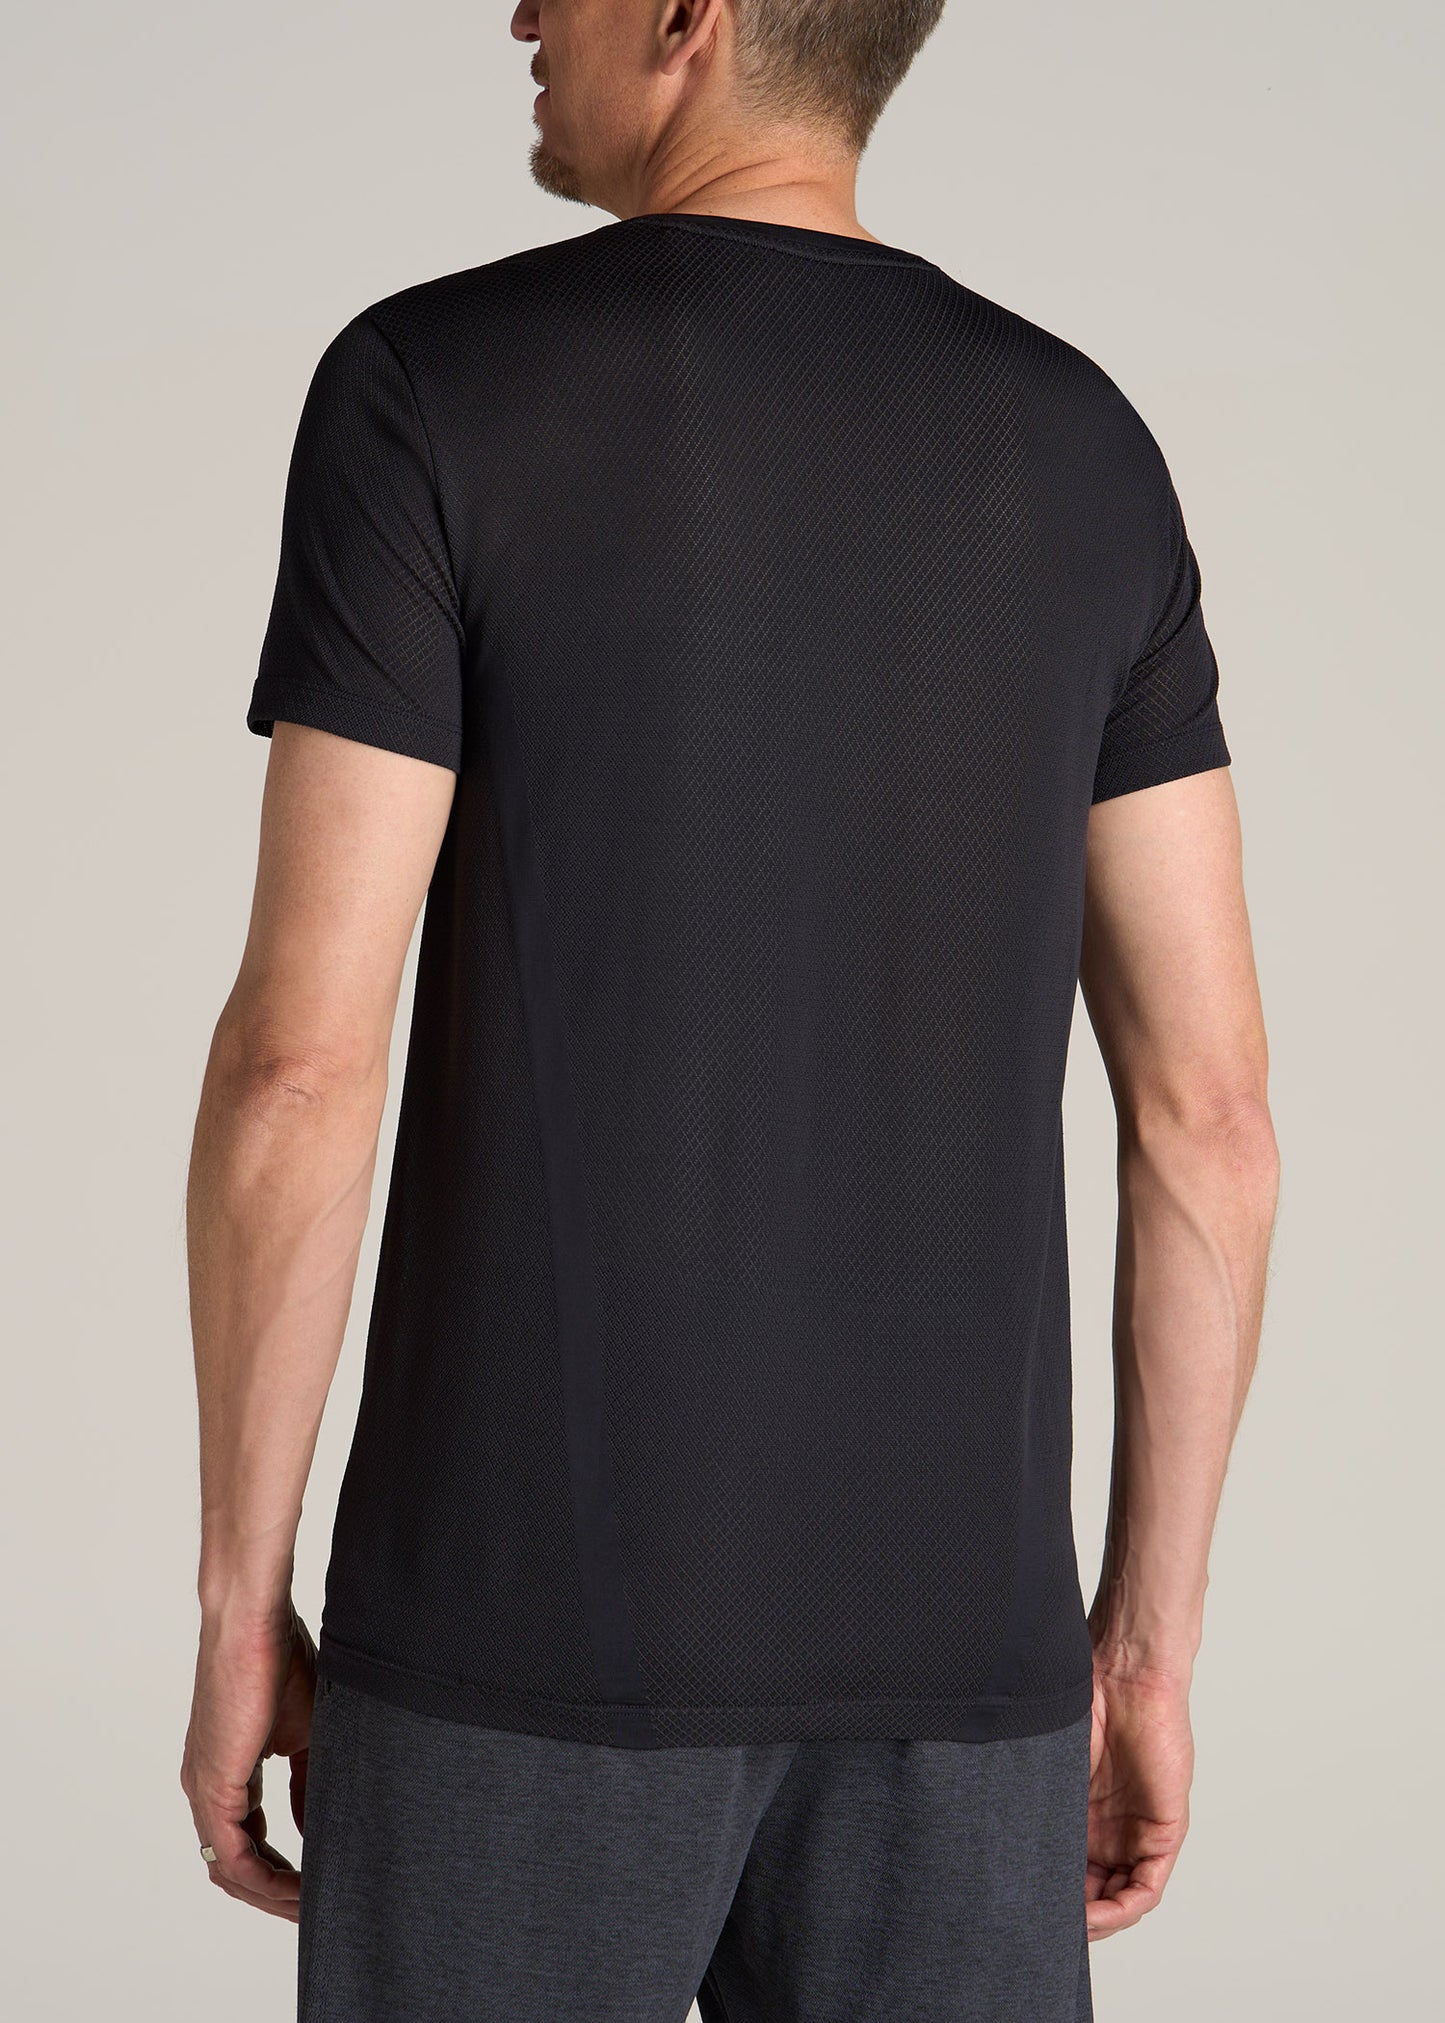 AT Performance Engineered Athletic Tall Tee in Black